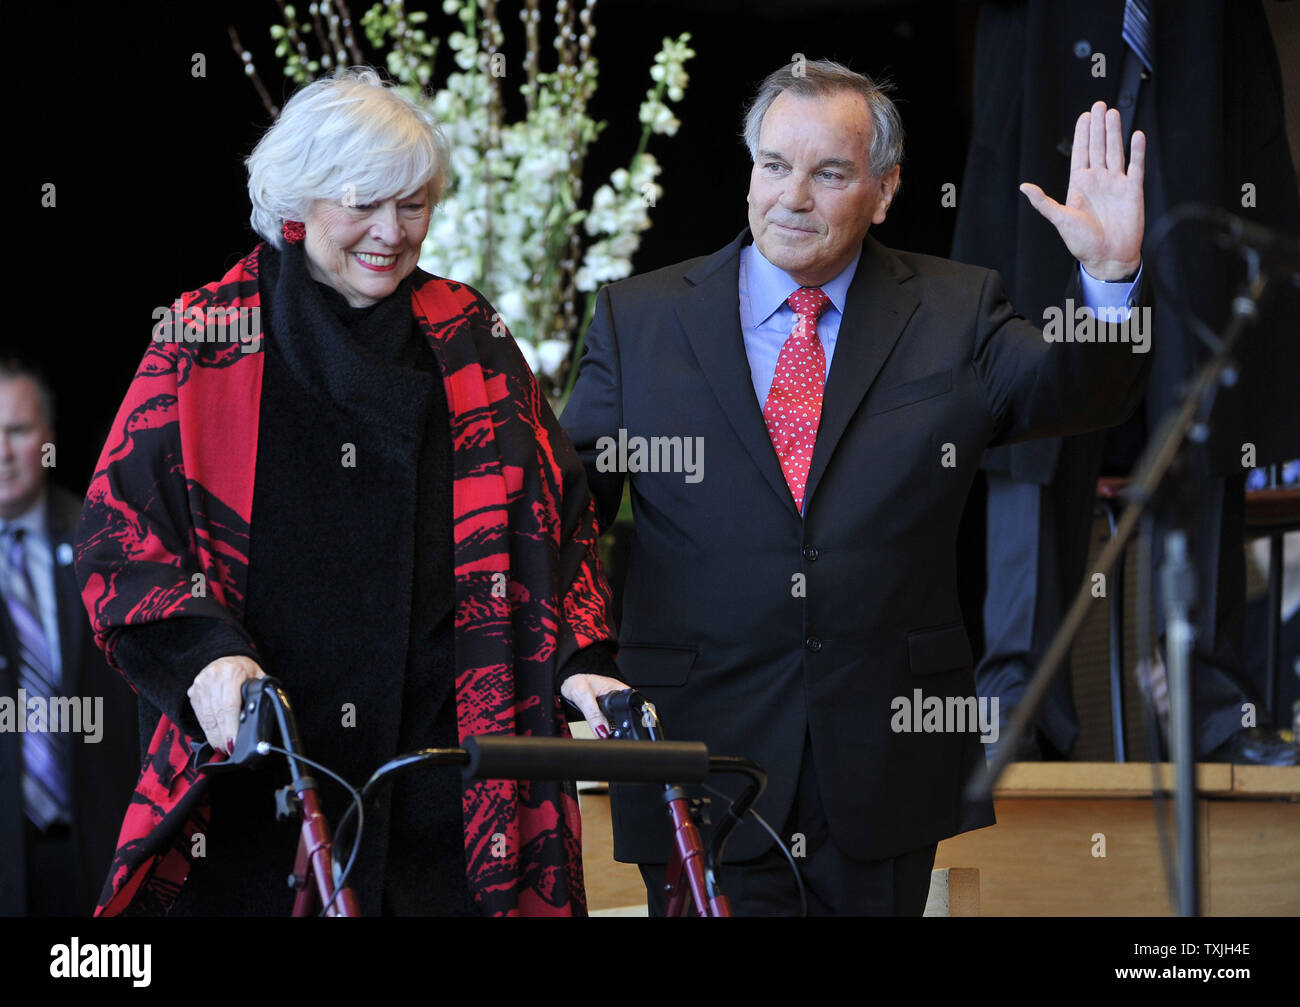 Chicago Mayor Richard M. Daley (R) and his wife Maggie are cheered as they are introduced at a ceremony to inaugurate Rahm Emanuel as mayor of Chicago at Millennium Park on May 16, 2011. Emanuel takes over for Richard M. Daley, who had served in the post since 1989.     UPI/Brian Kersey Stock Photo